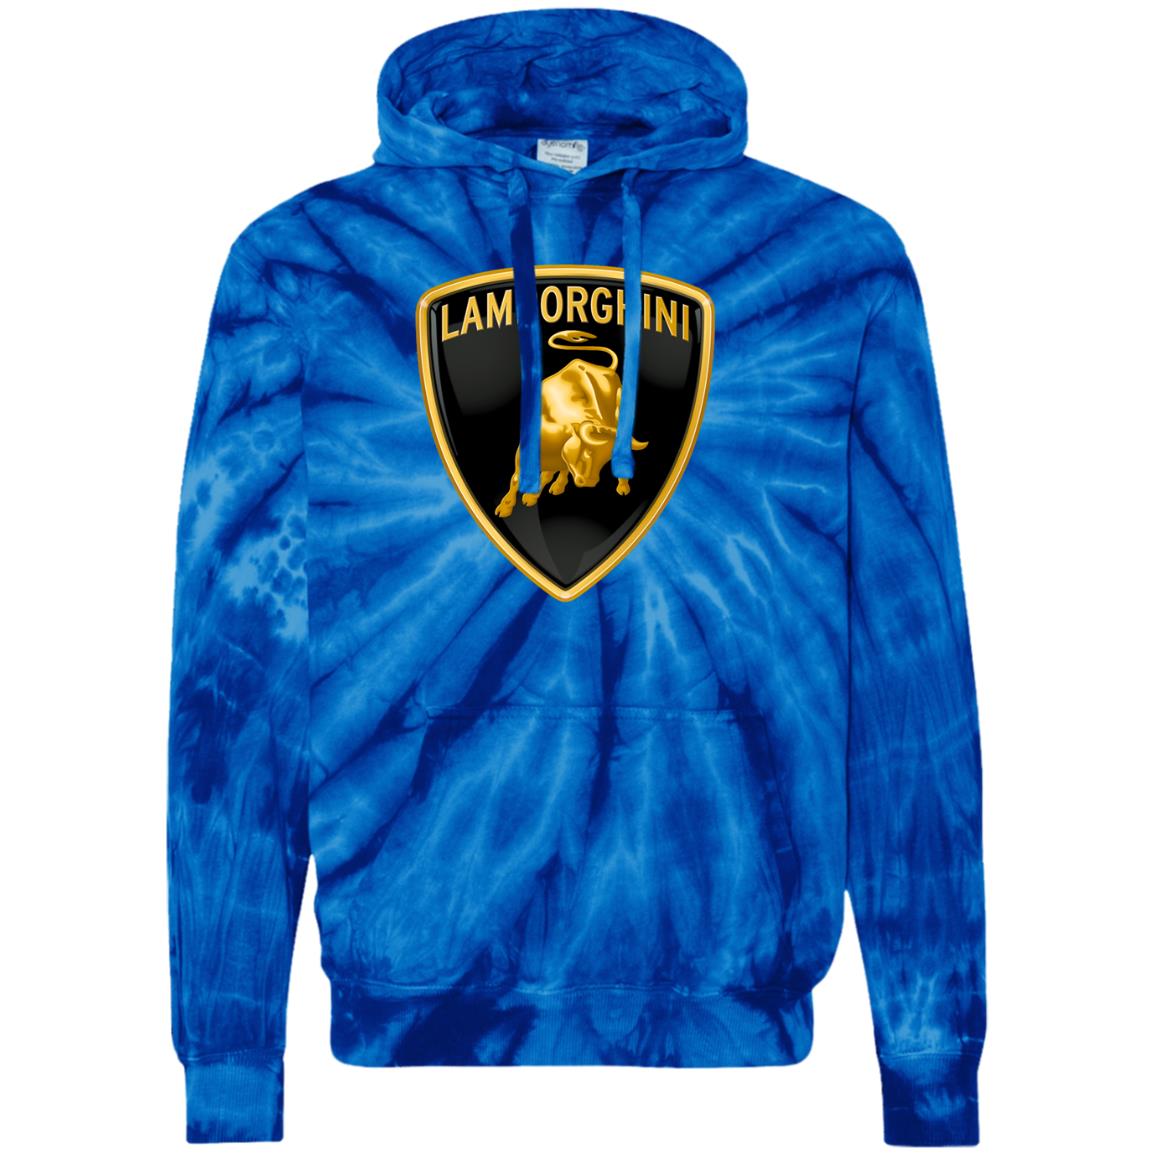 Lamborghini Unisex Tie-Dyed Pullover Hoodie - My Car My Rules